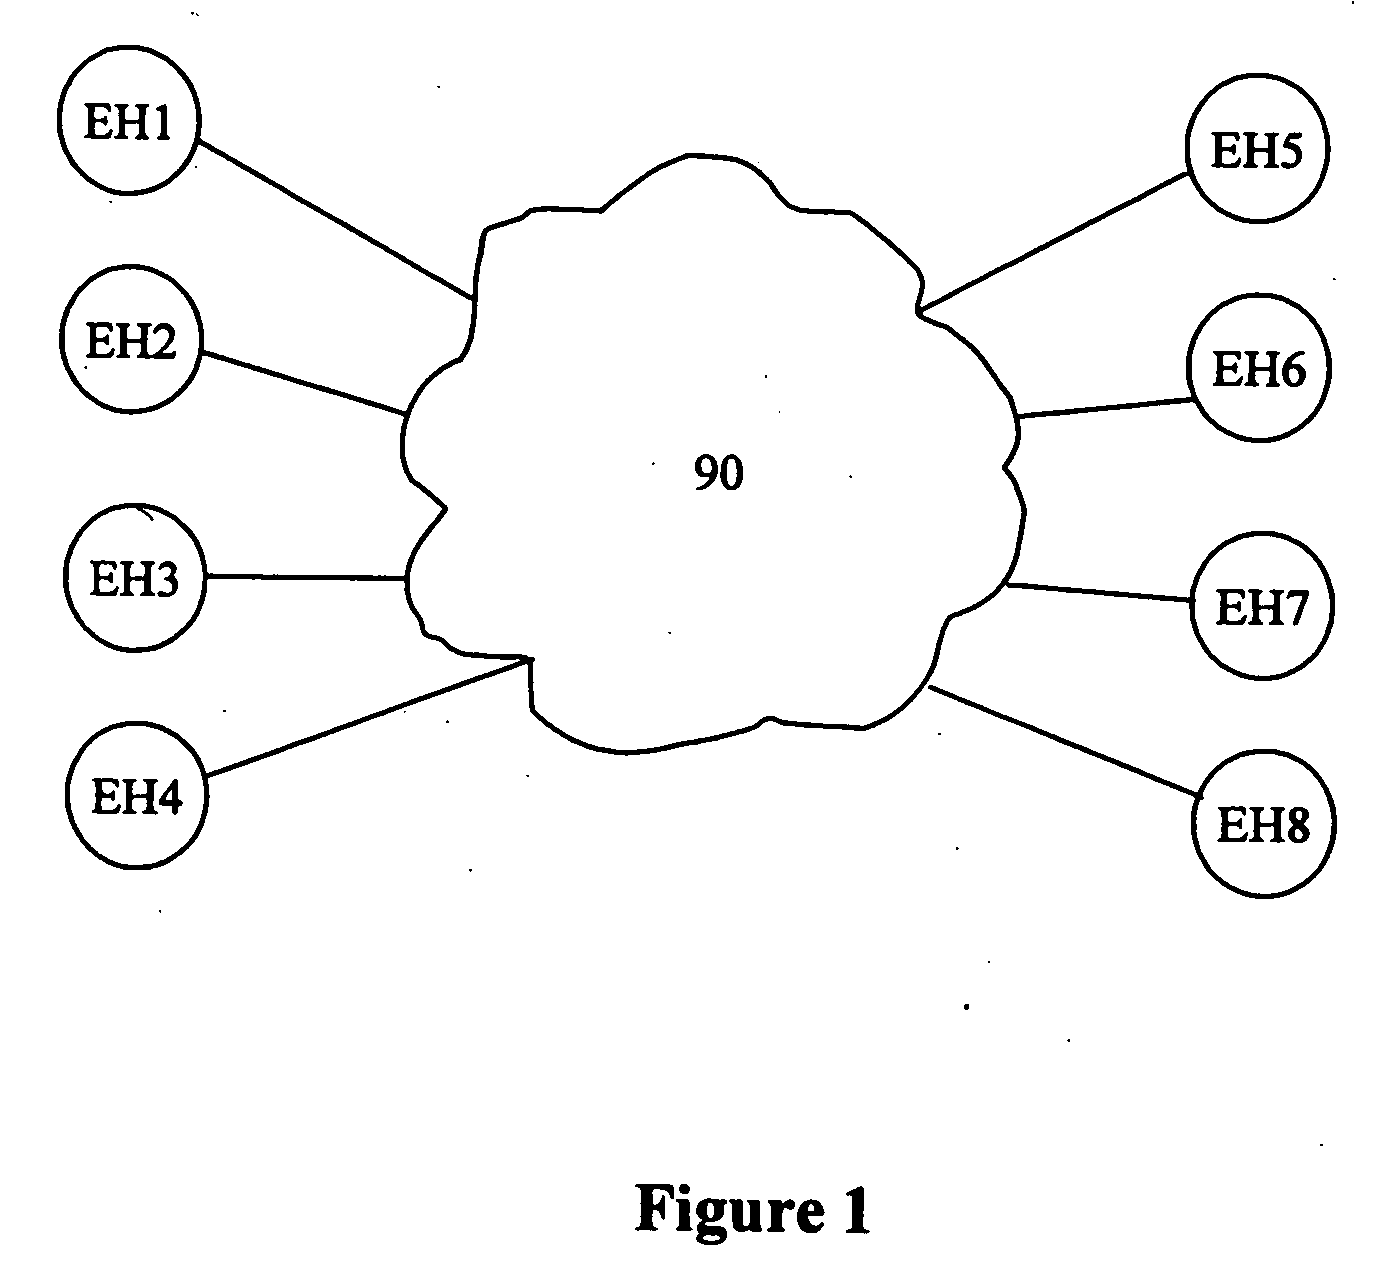 System and method for determining segment and link bandwidth capacities